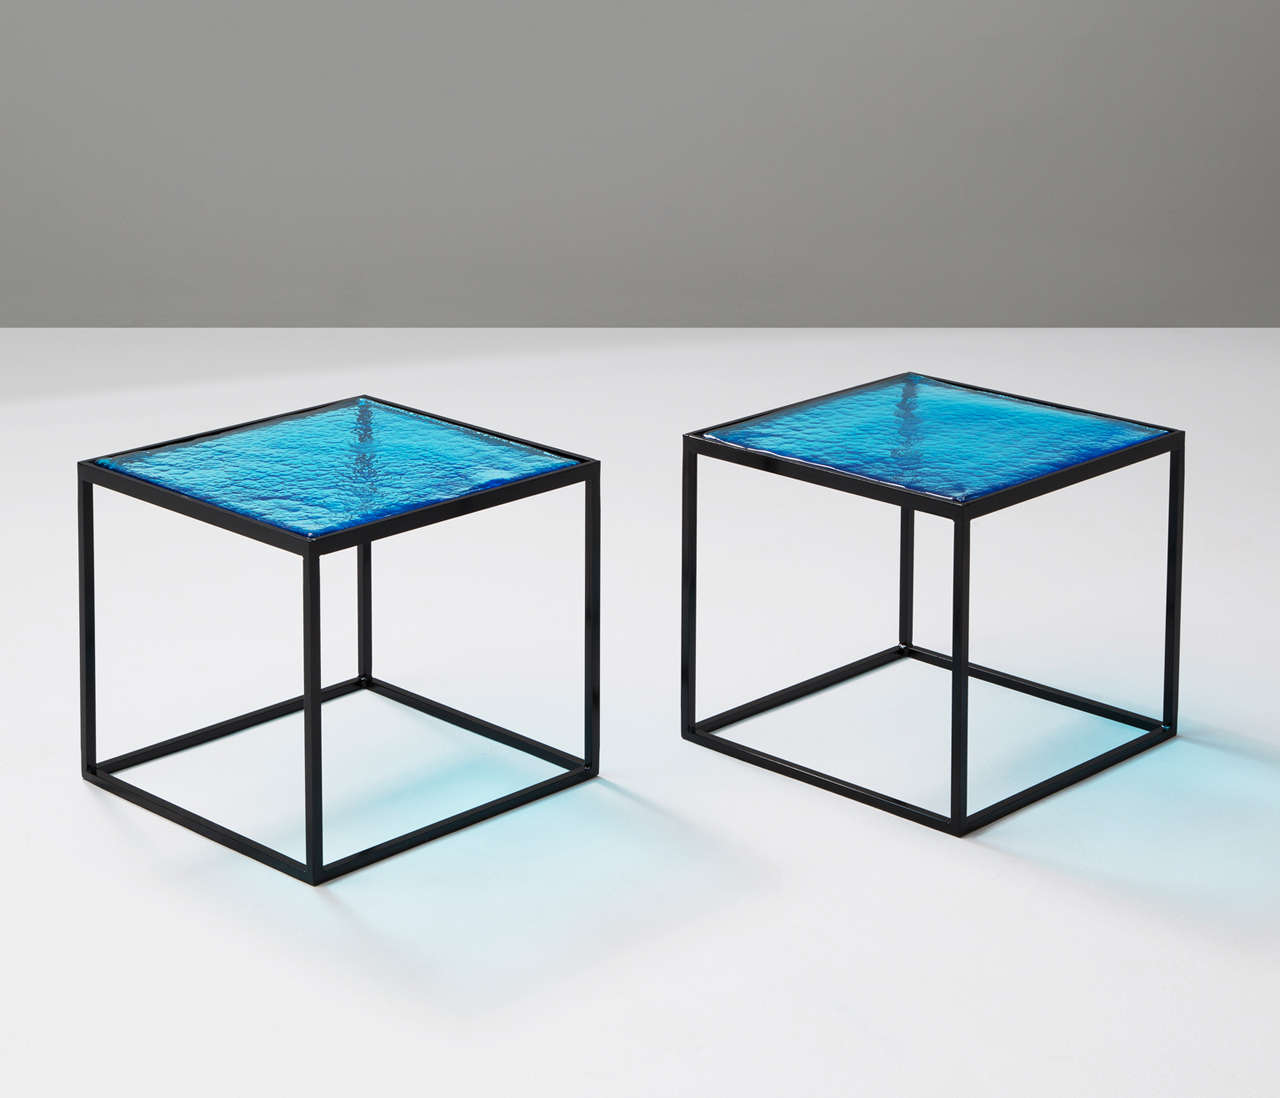 This Italian glass was made by melting raw materials under high temperatures adding colored glass which gives this side tables their unique pattern and airy elegance. Combined with a solid black-coated metal 